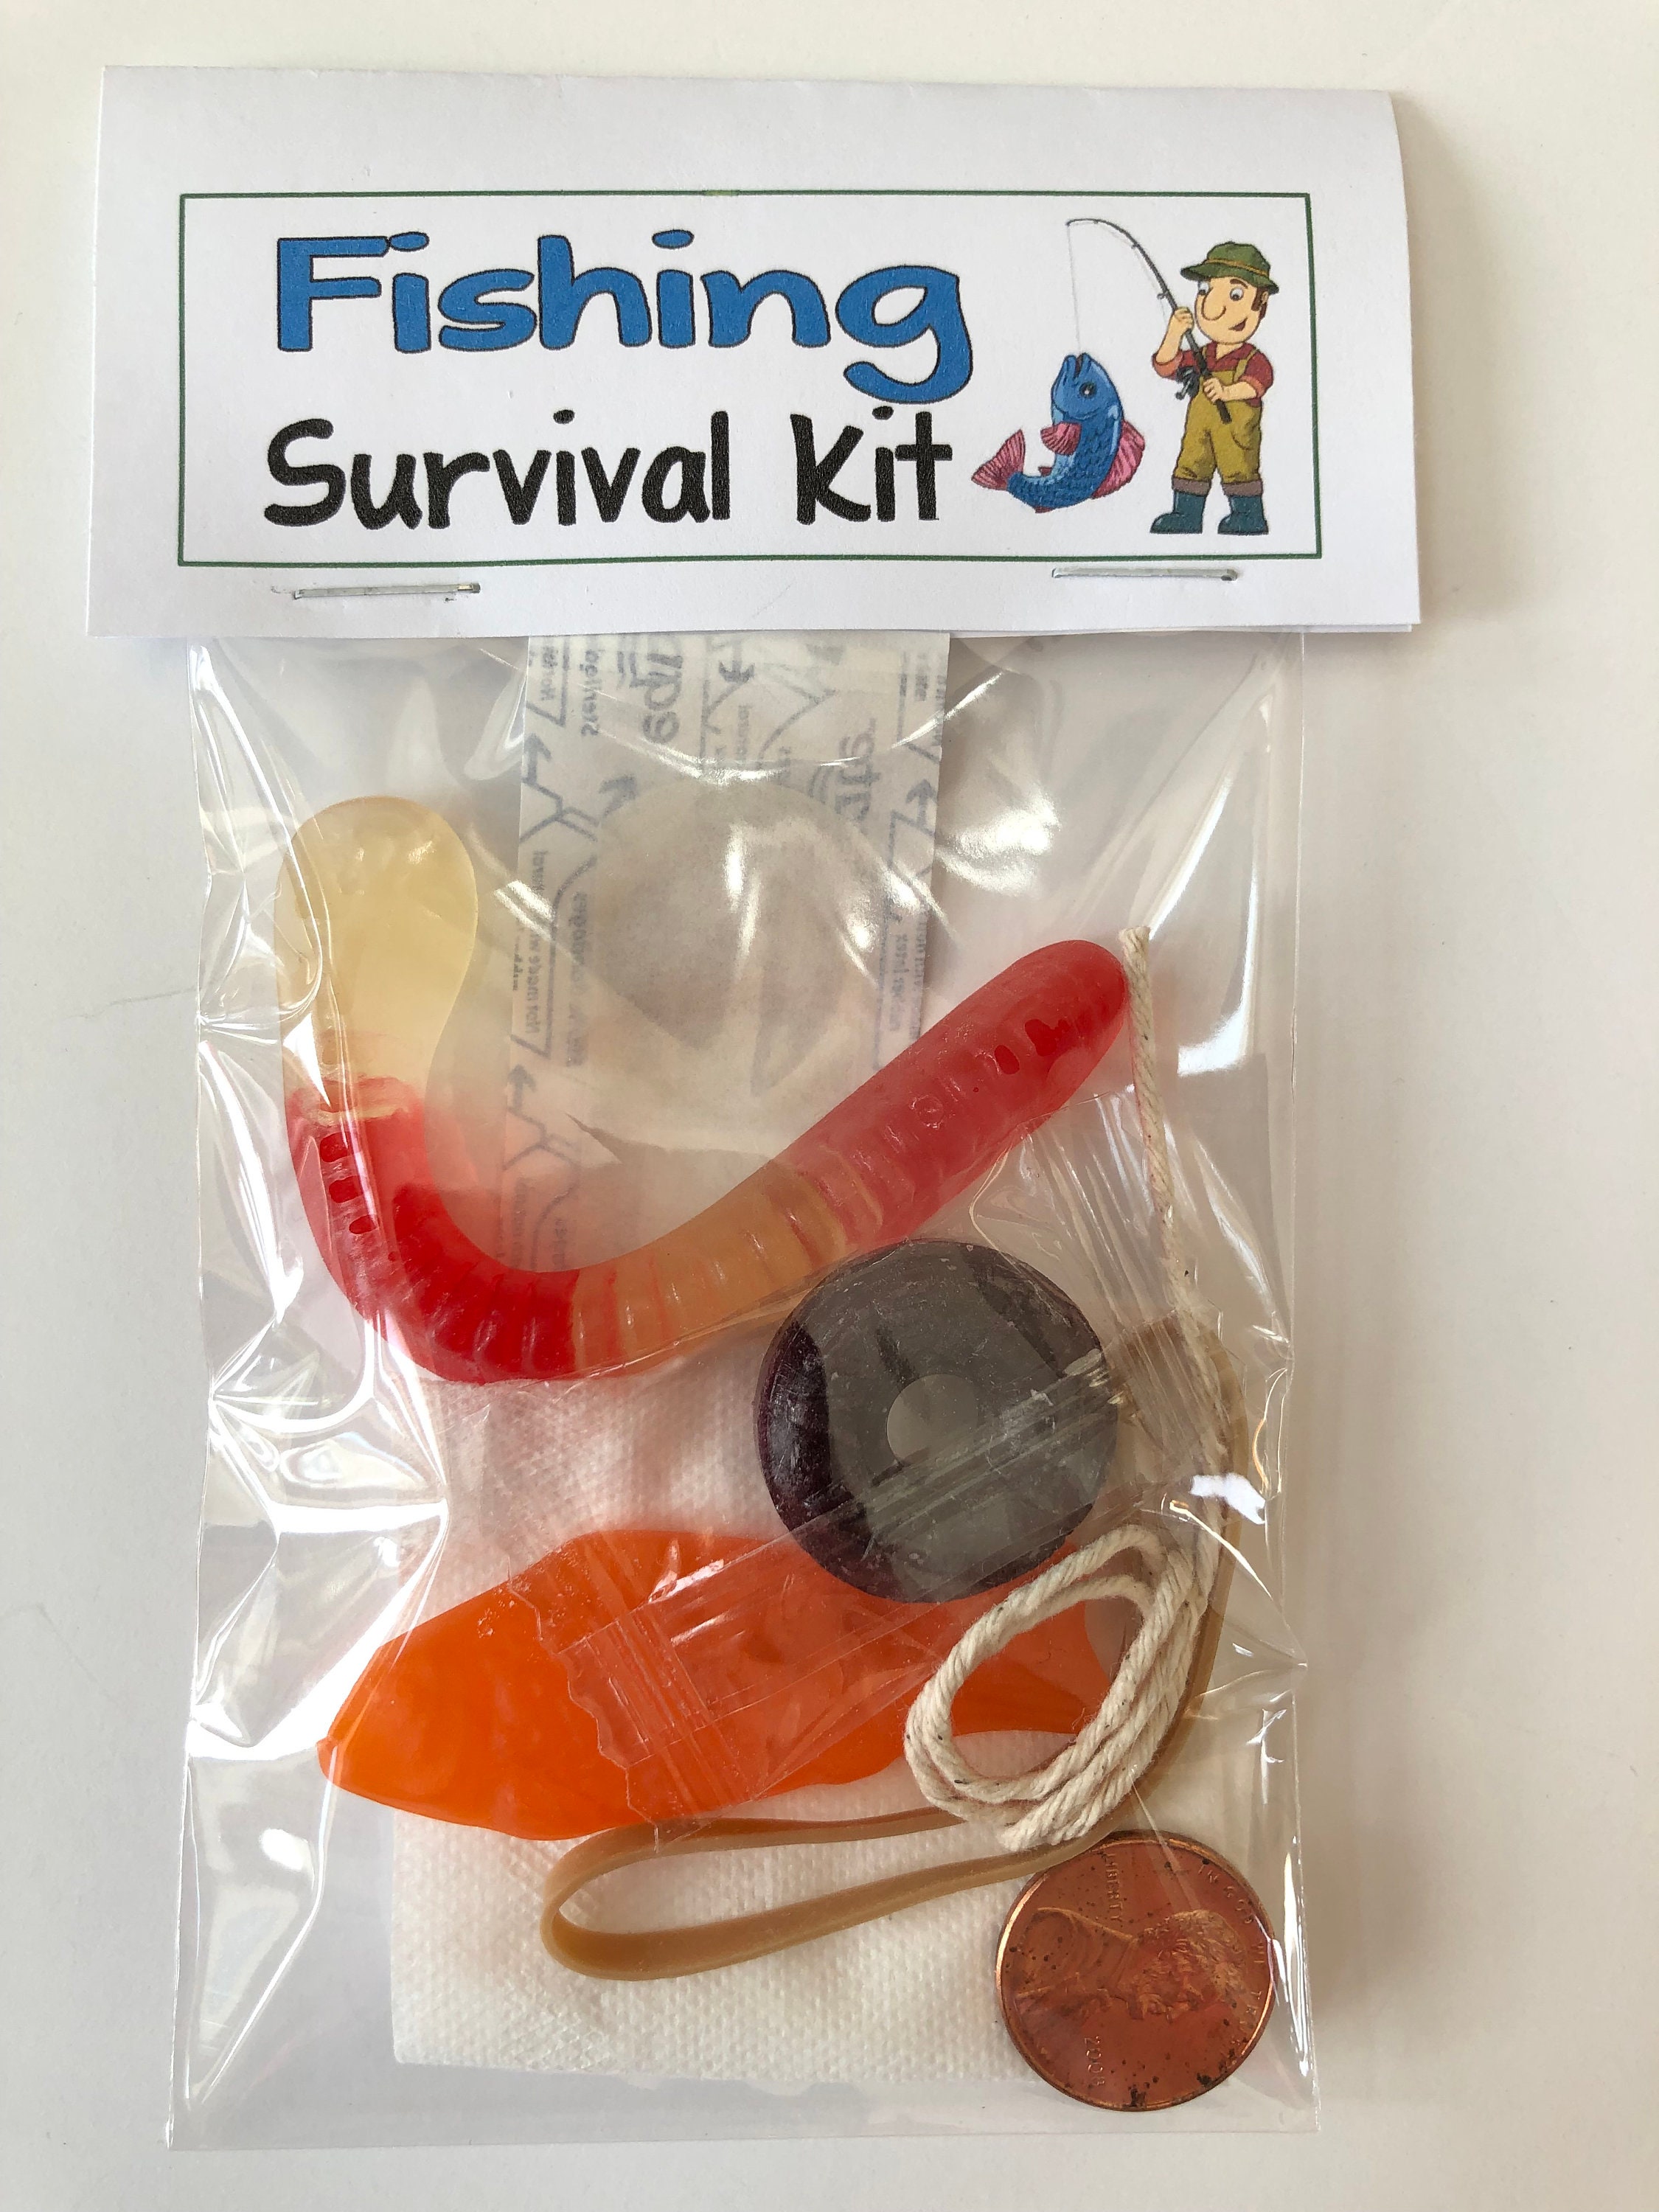 FISHING SURVIVAL KIT, Gag Gift Bags, Hilarious Birthday, White Elephant  ,silly Joke, Novelty Prank Gifts, Funny, Dad, Grandpa -  Canada